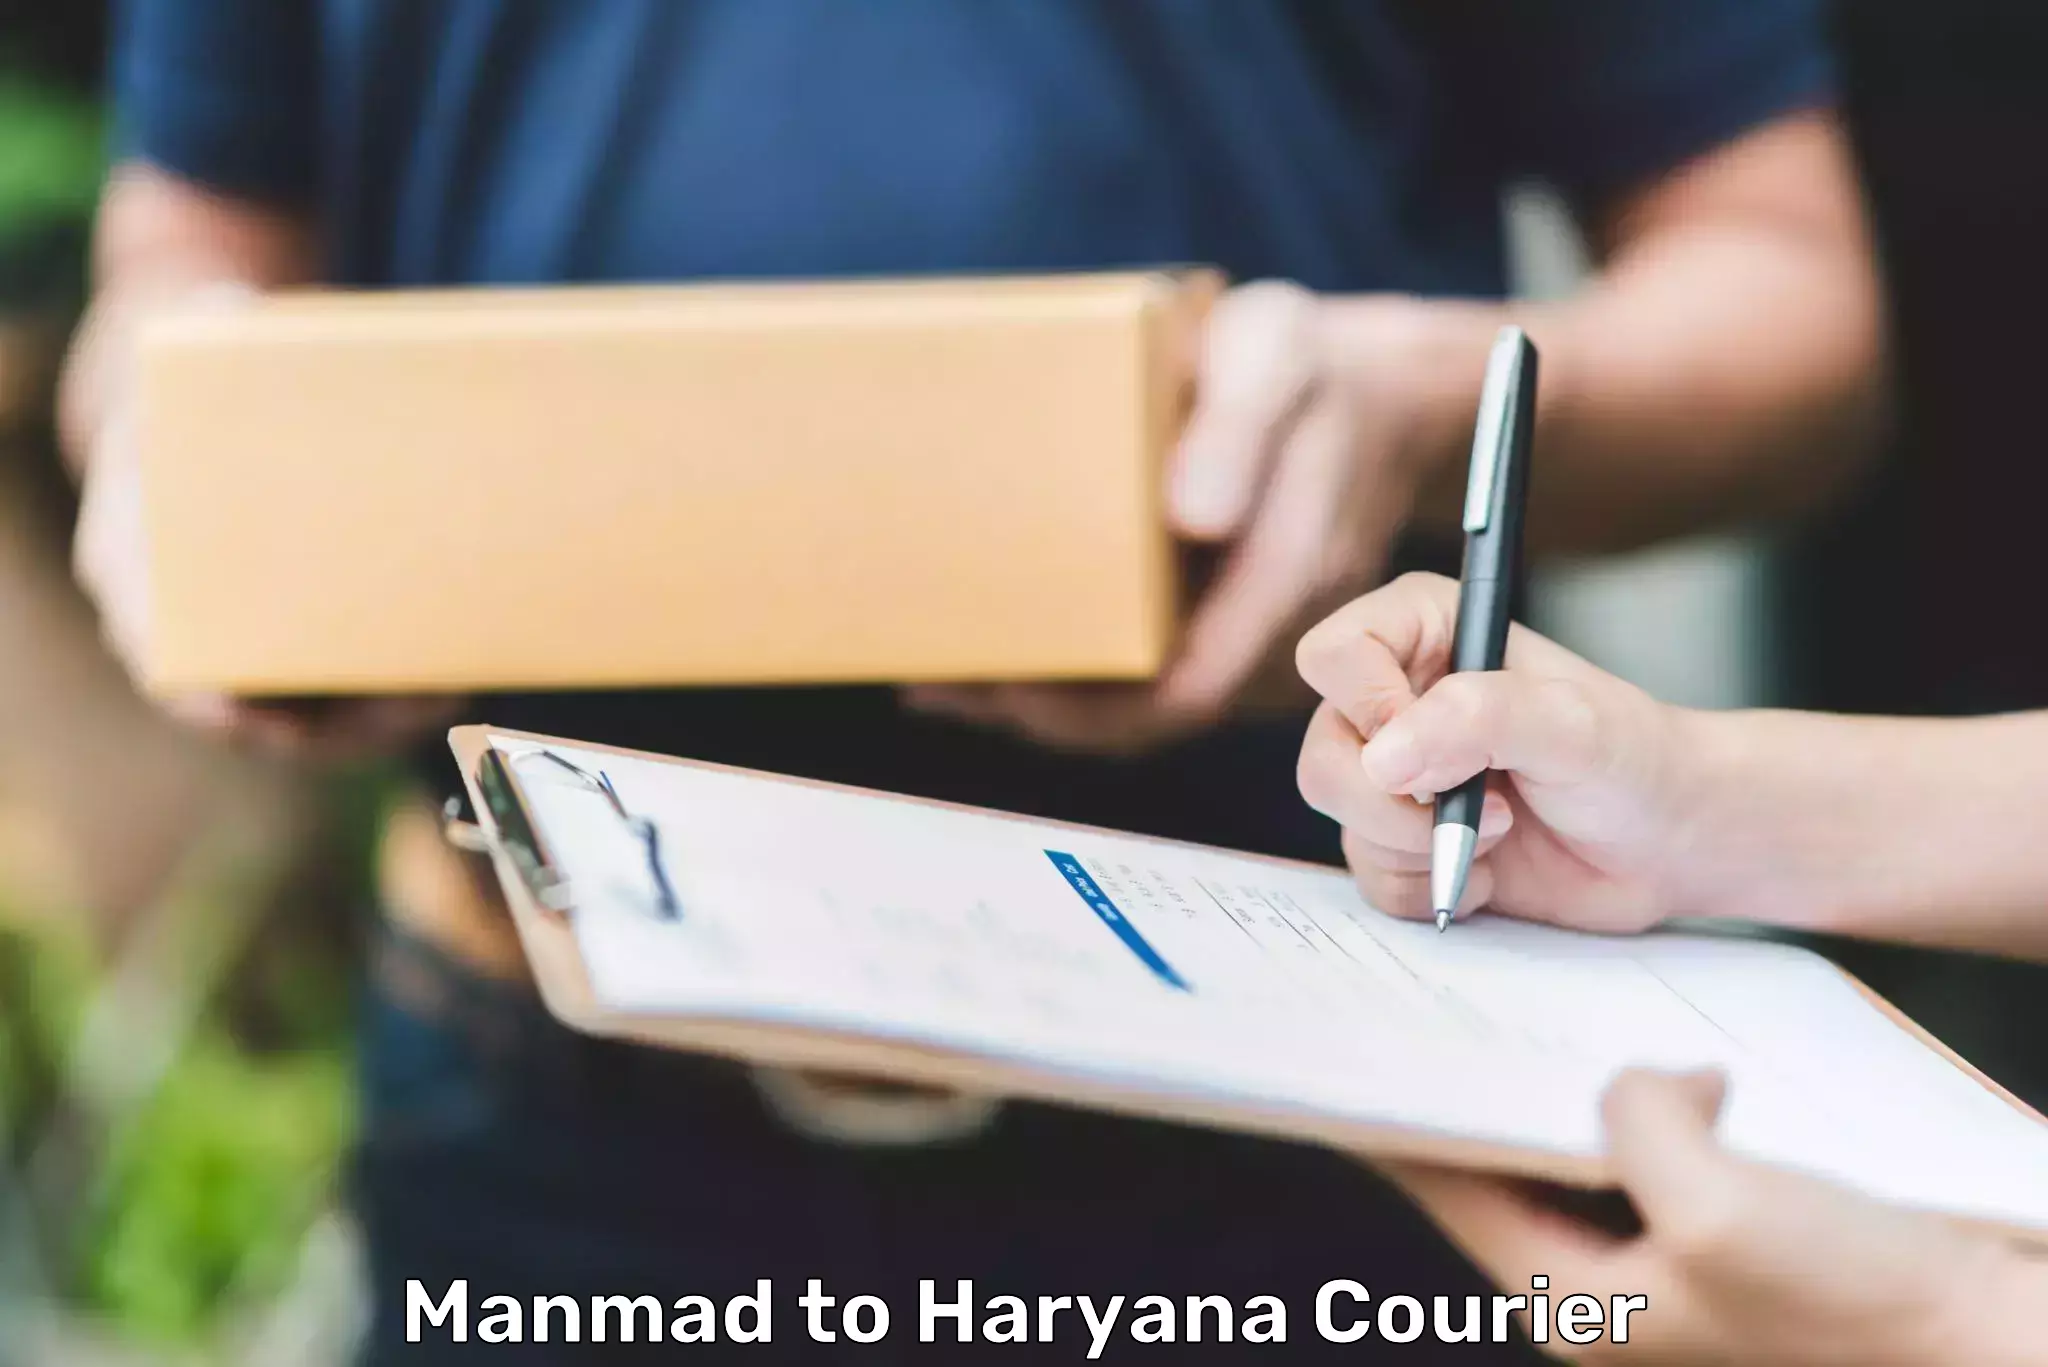 Online package tracking Manmad to Chaudhary Charan Singh Haryana Agricultural University Hisar